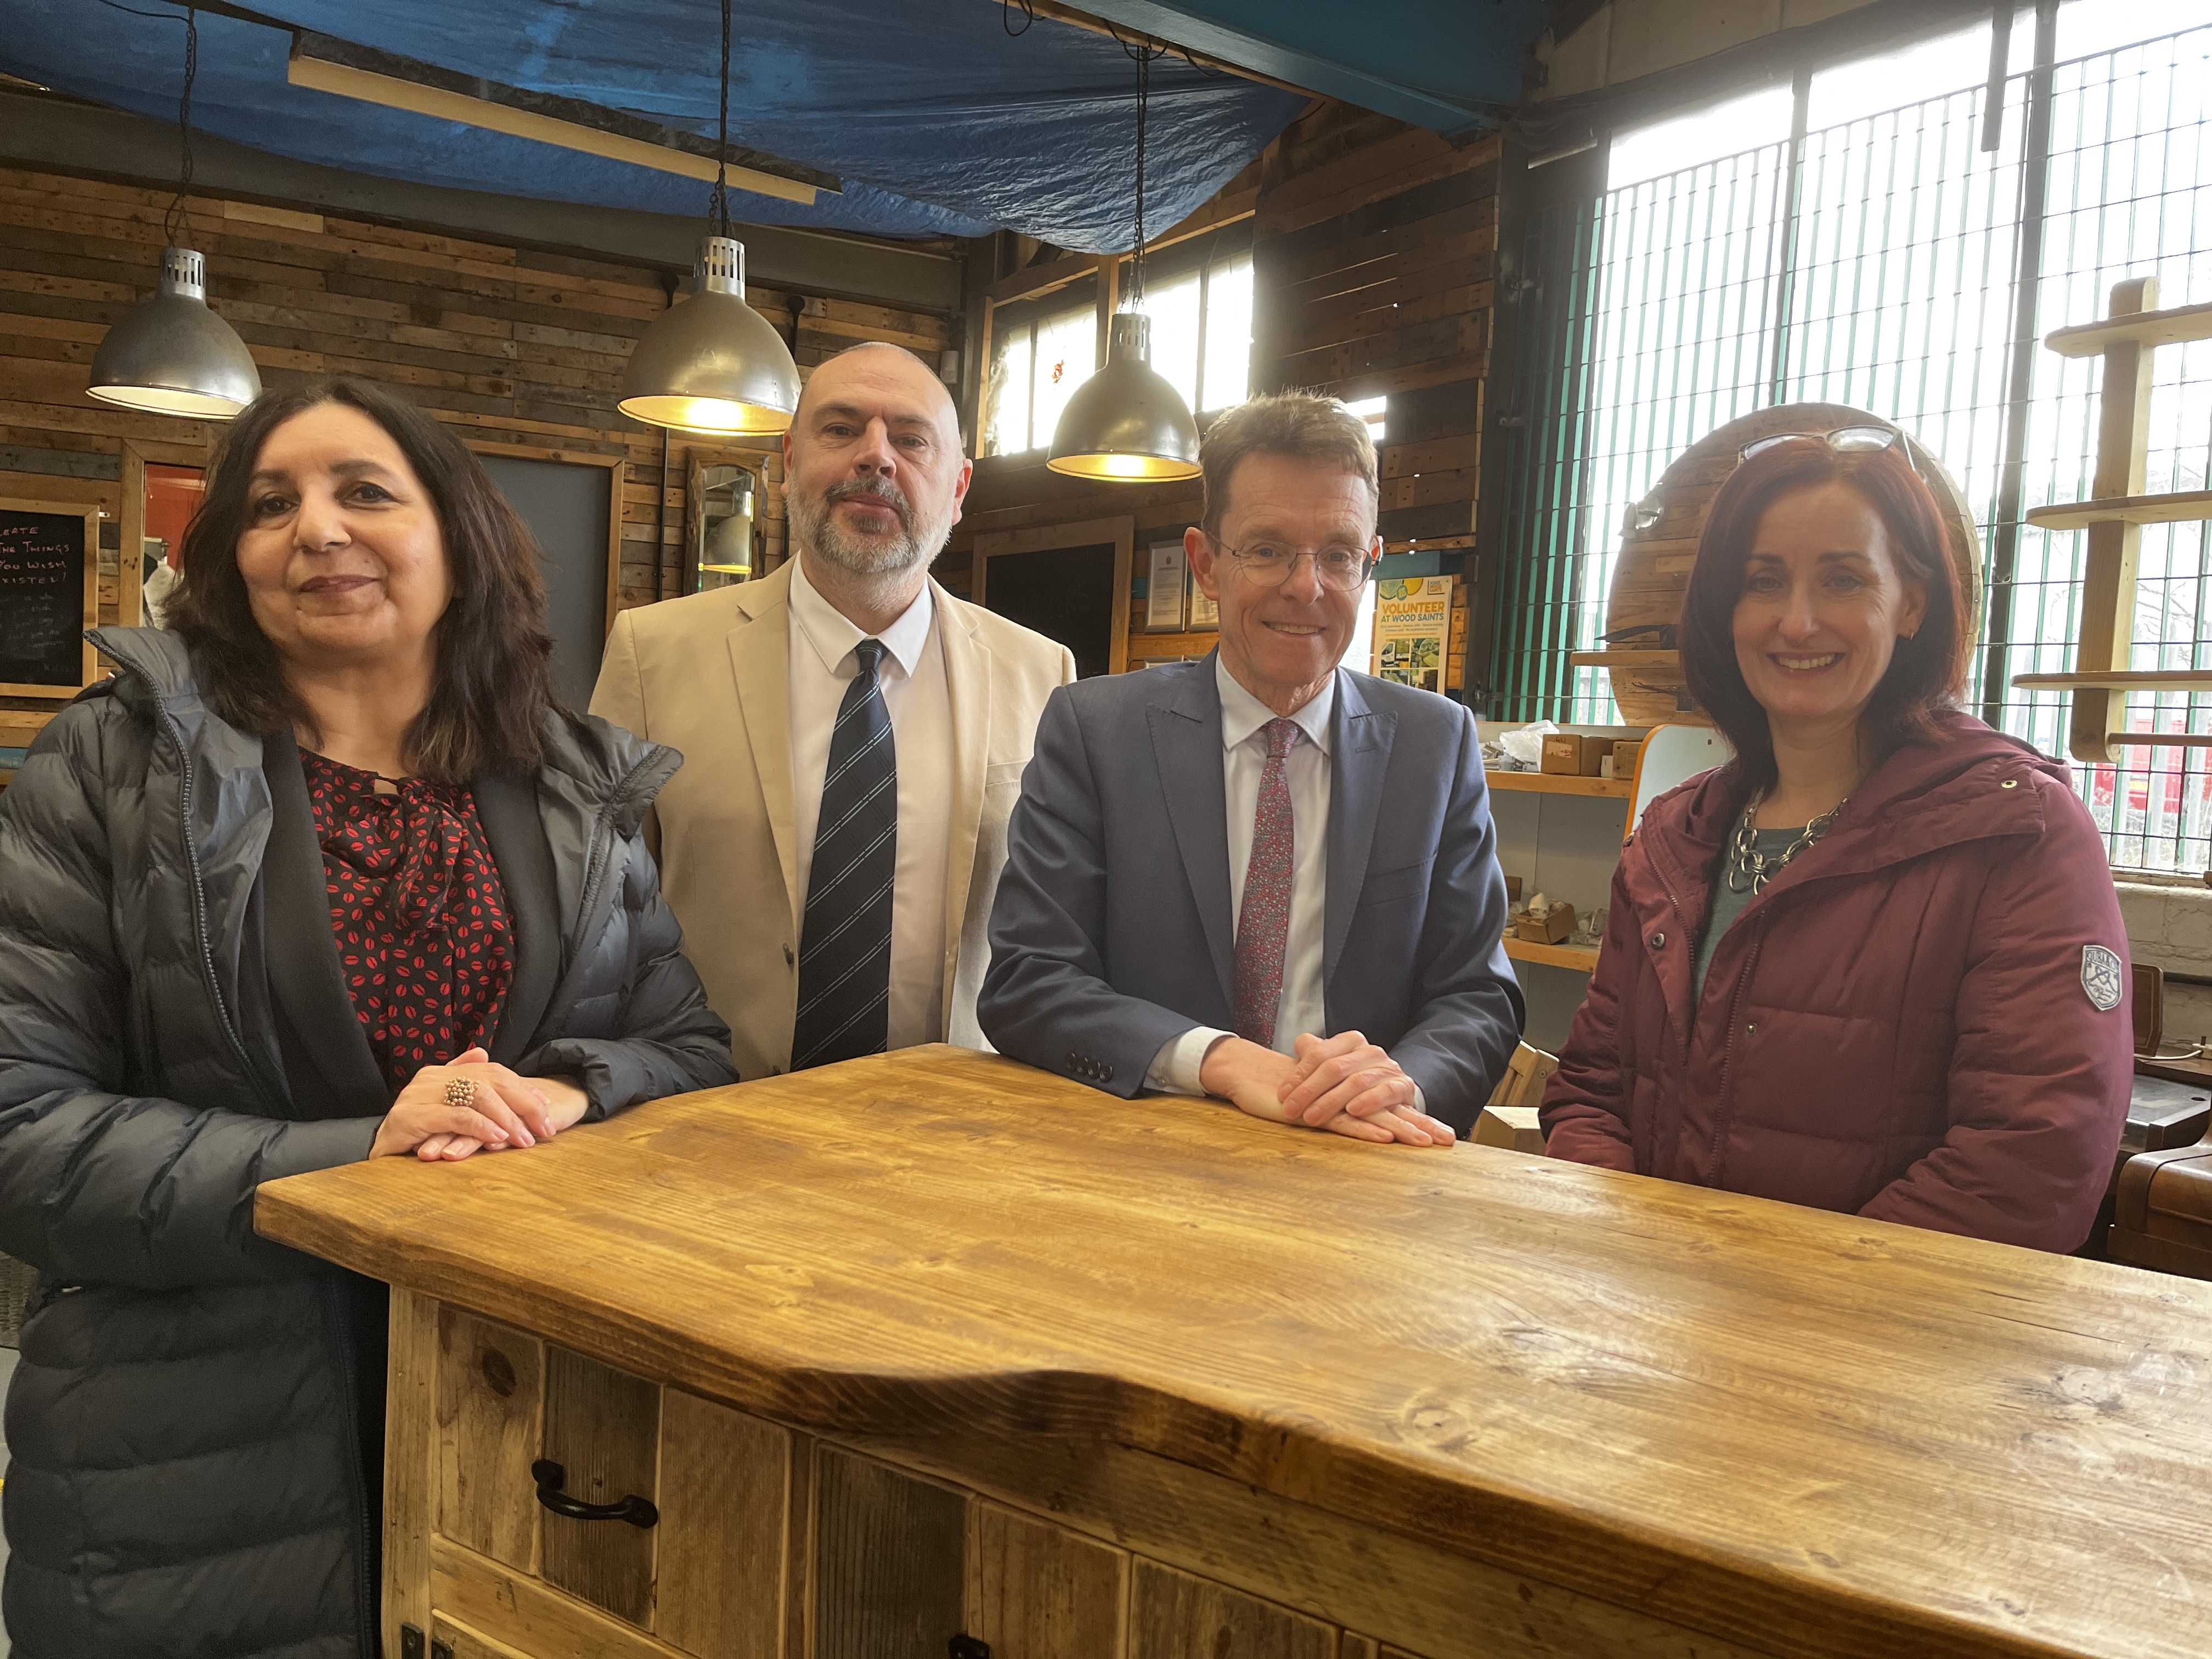 Shobha Asar-Paul, chief officer at All Saints Action Network, Cllr Craig Collingswood, City of Wolverhampton Council’s cabinet member for environment and climate change, Andy Street, Mayor of the West Midlands and WMCA chair, and Debbie Ward, director at Rebuild CIC.